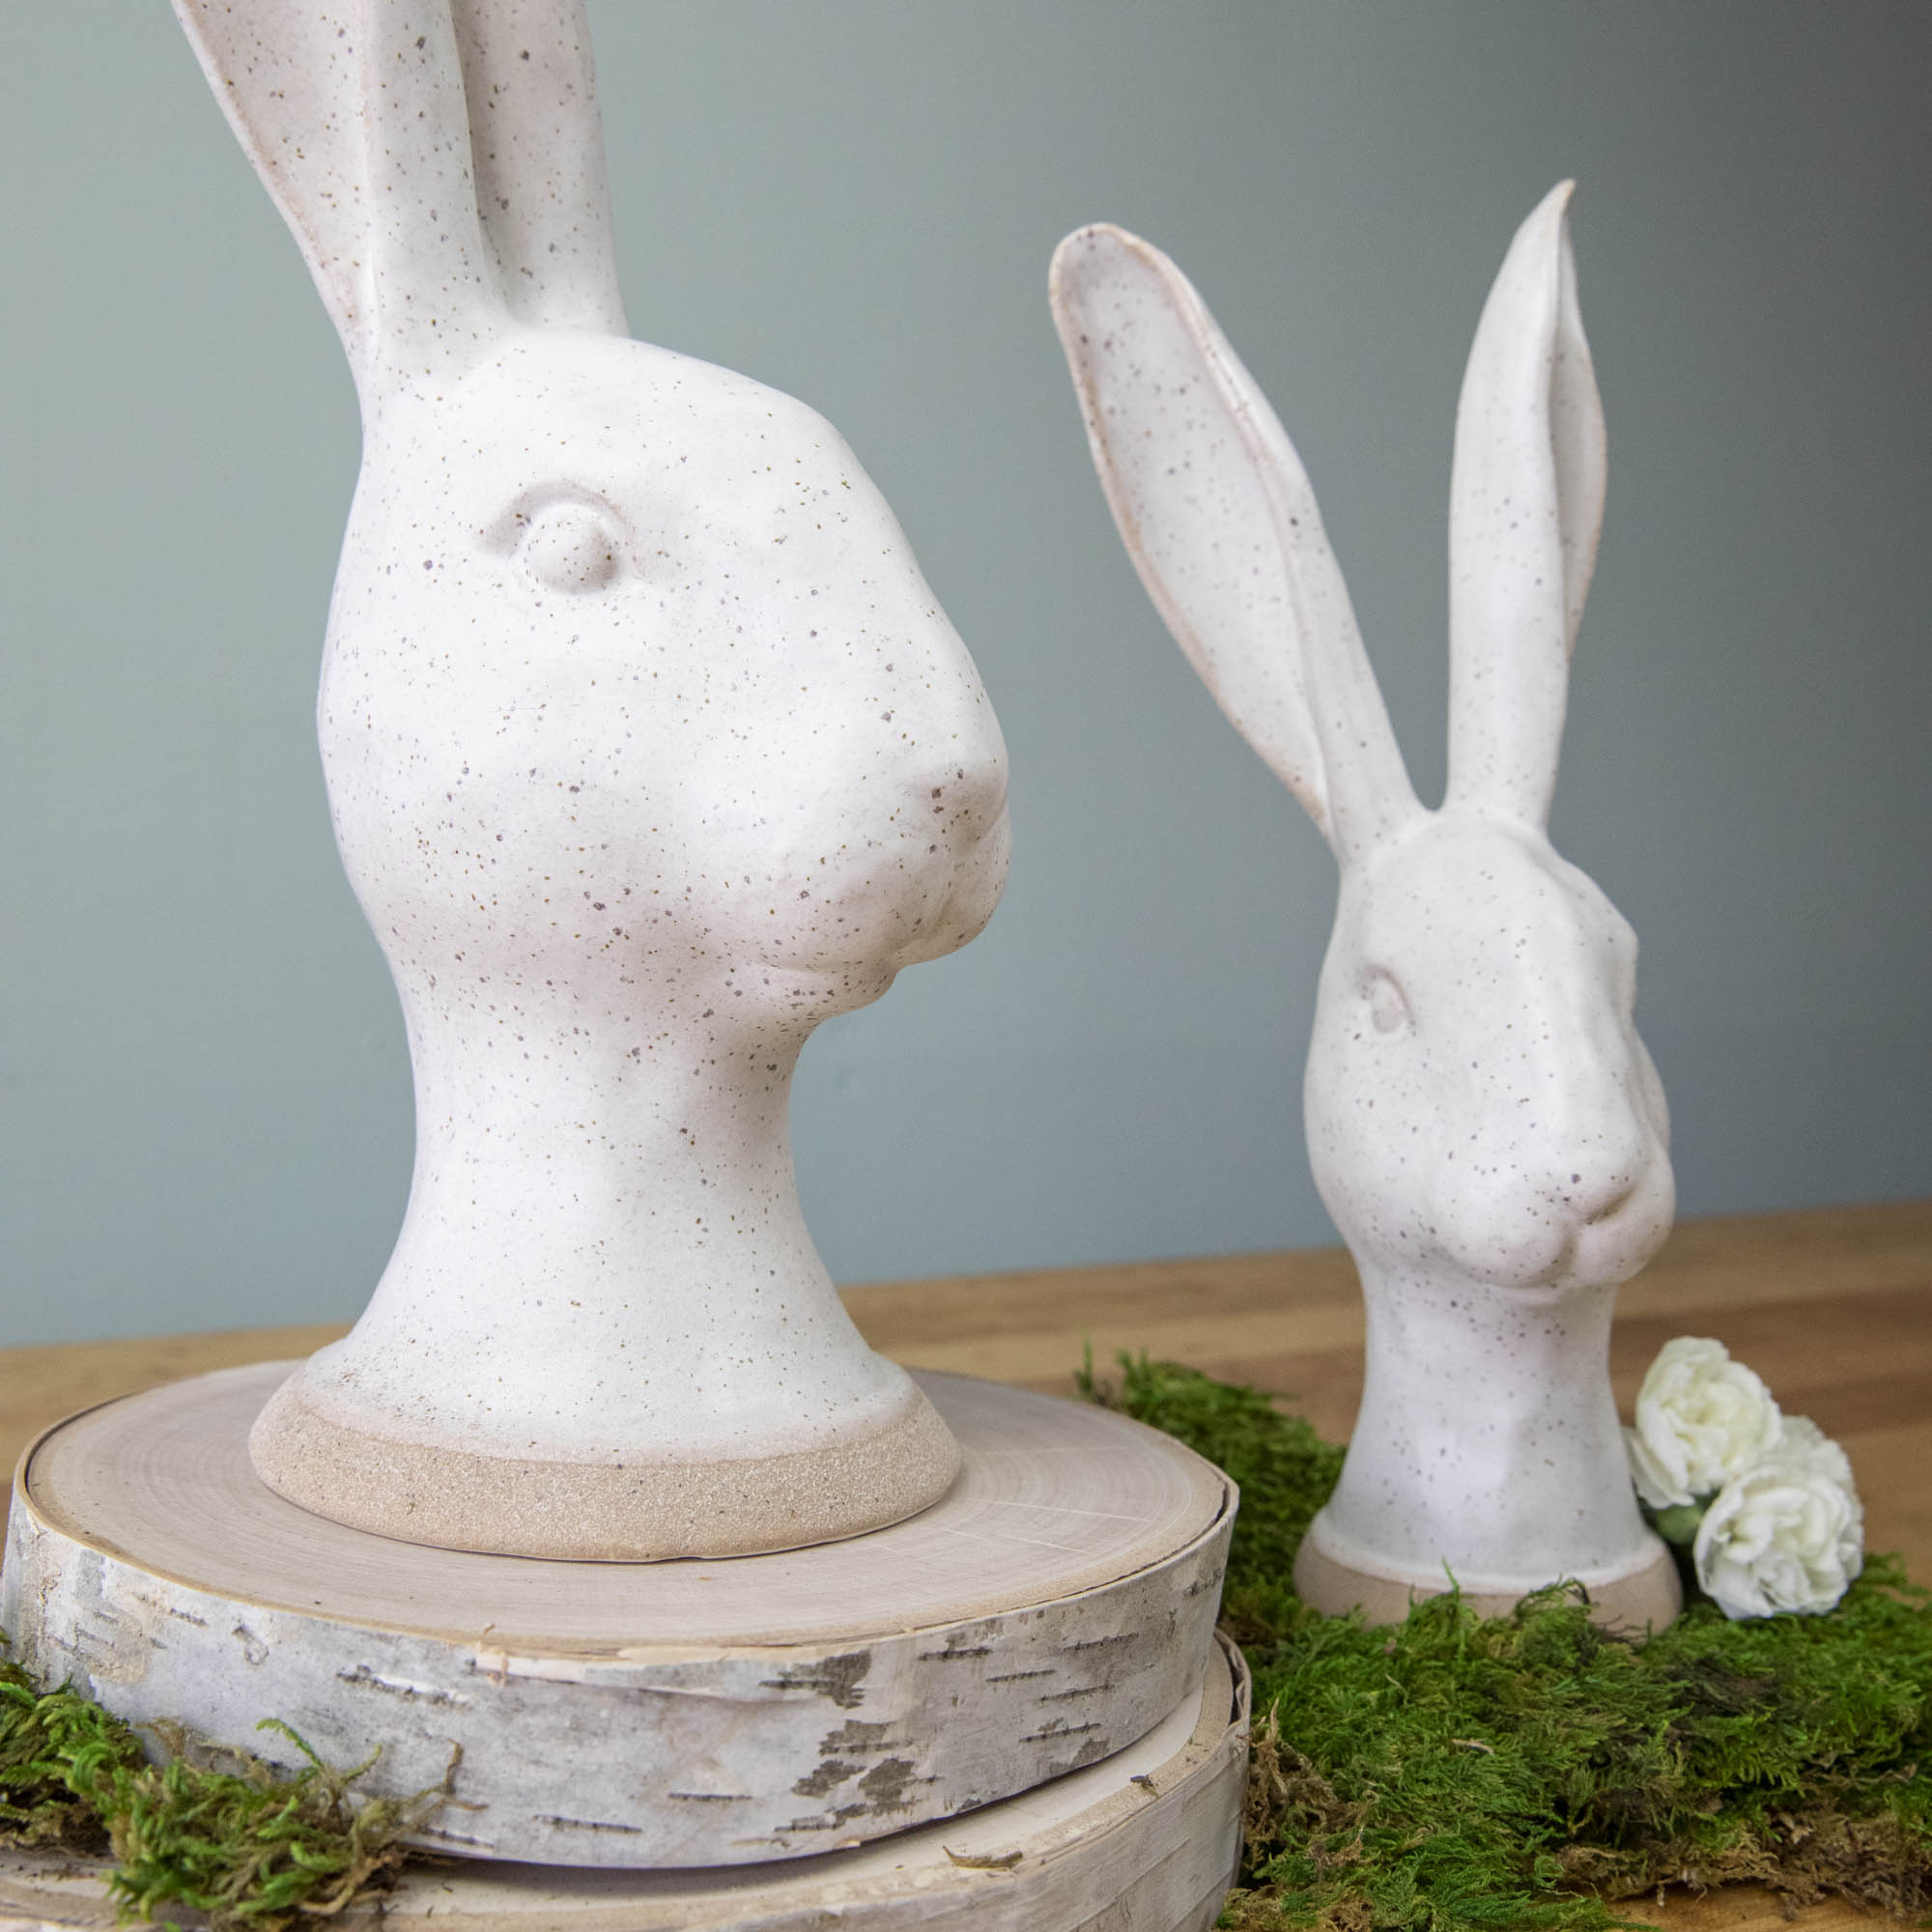 An enchanting HomArt Matte White Ceramic Hares sits on a wood surface.